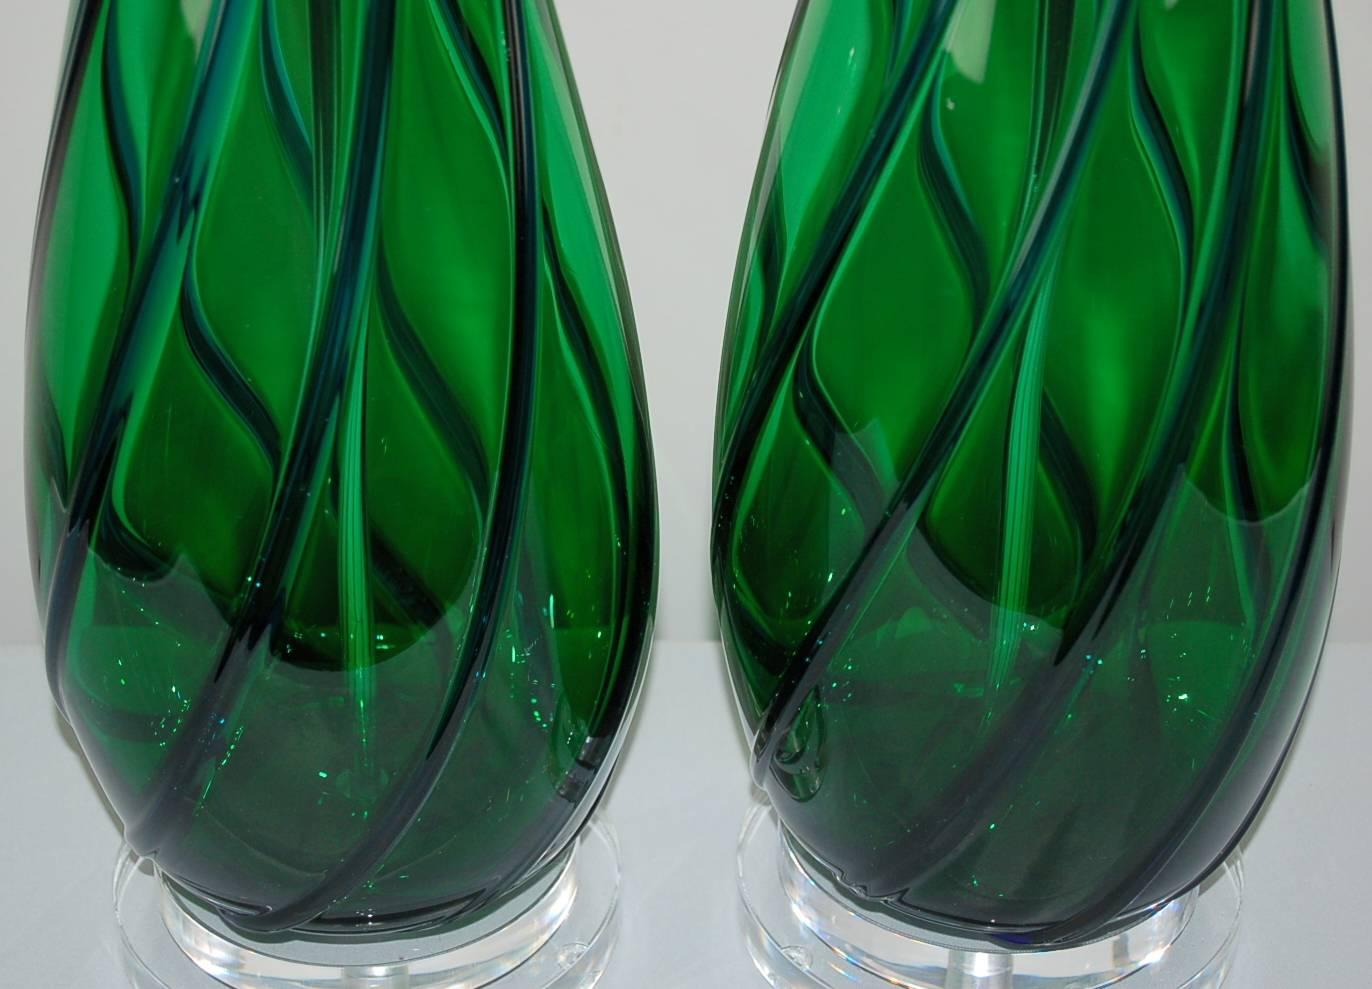 Matched Pair of Vintage Murano Lamps in Green and Blue 2